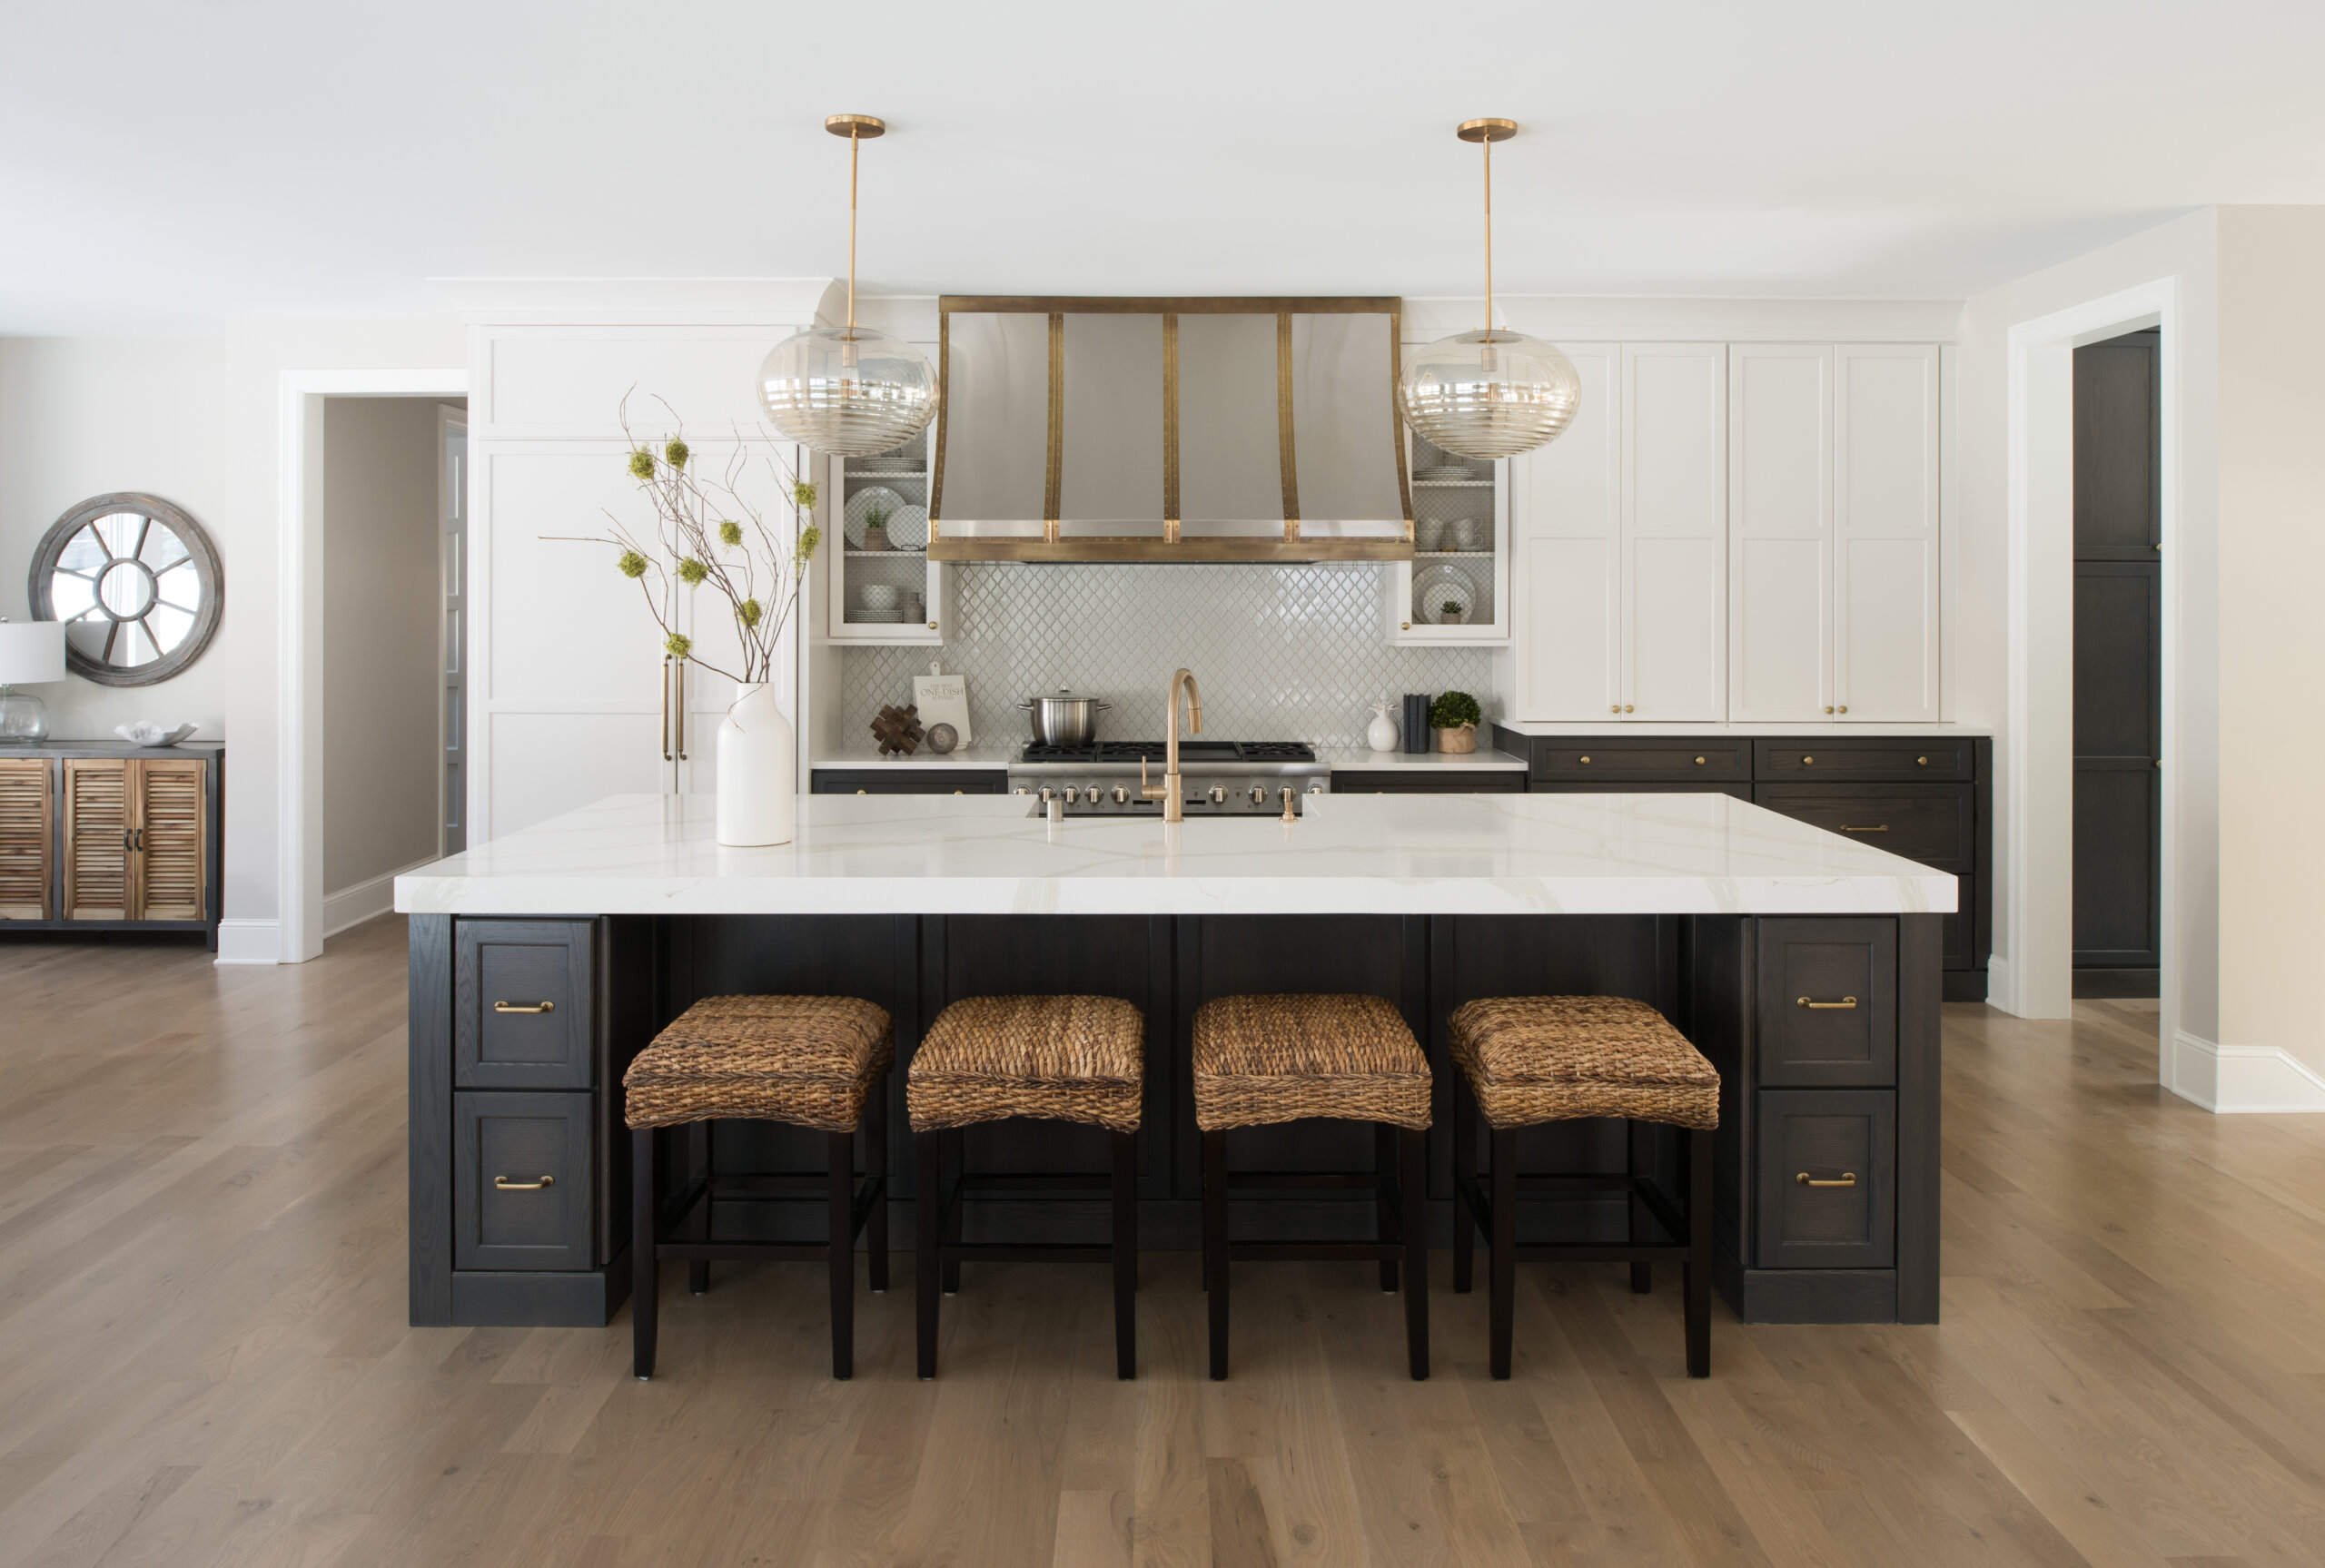 A stunning new construction home with two-toned cabinets. I love my Dura Supreme Cabinetry and new kitchen!